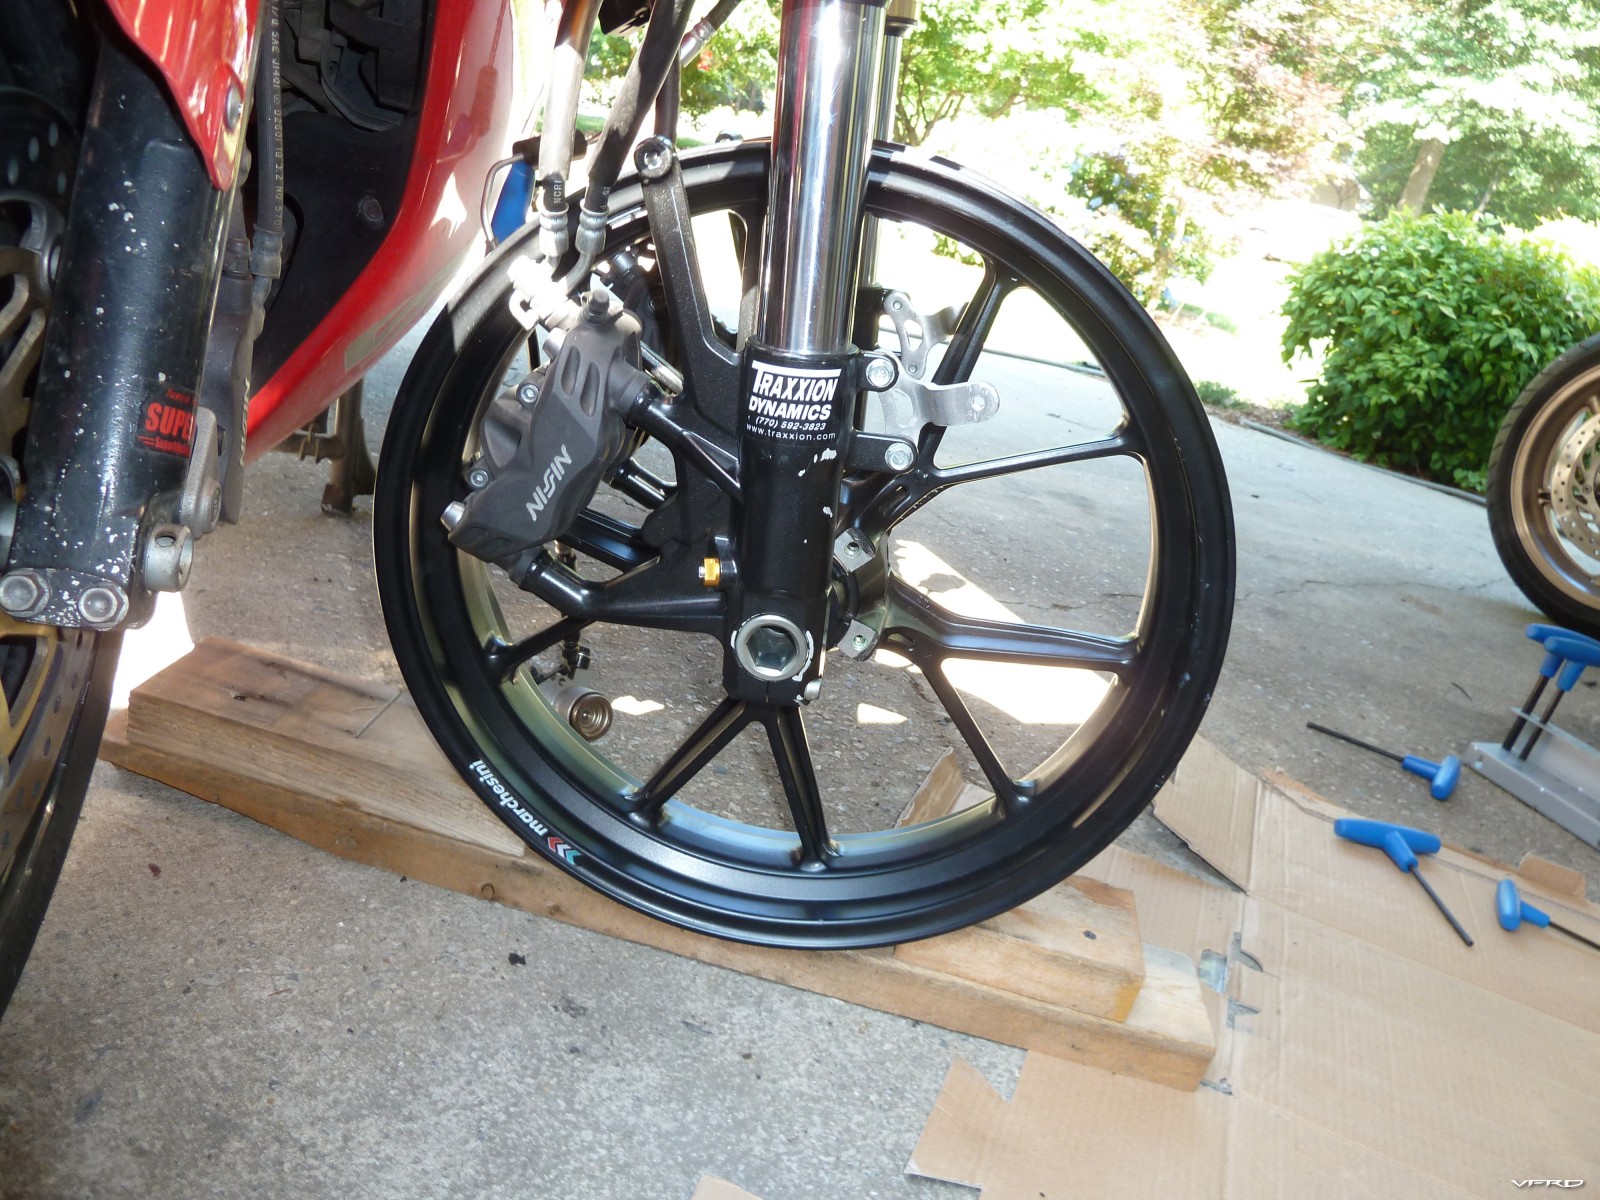 USD Forks and Duc rear wheel